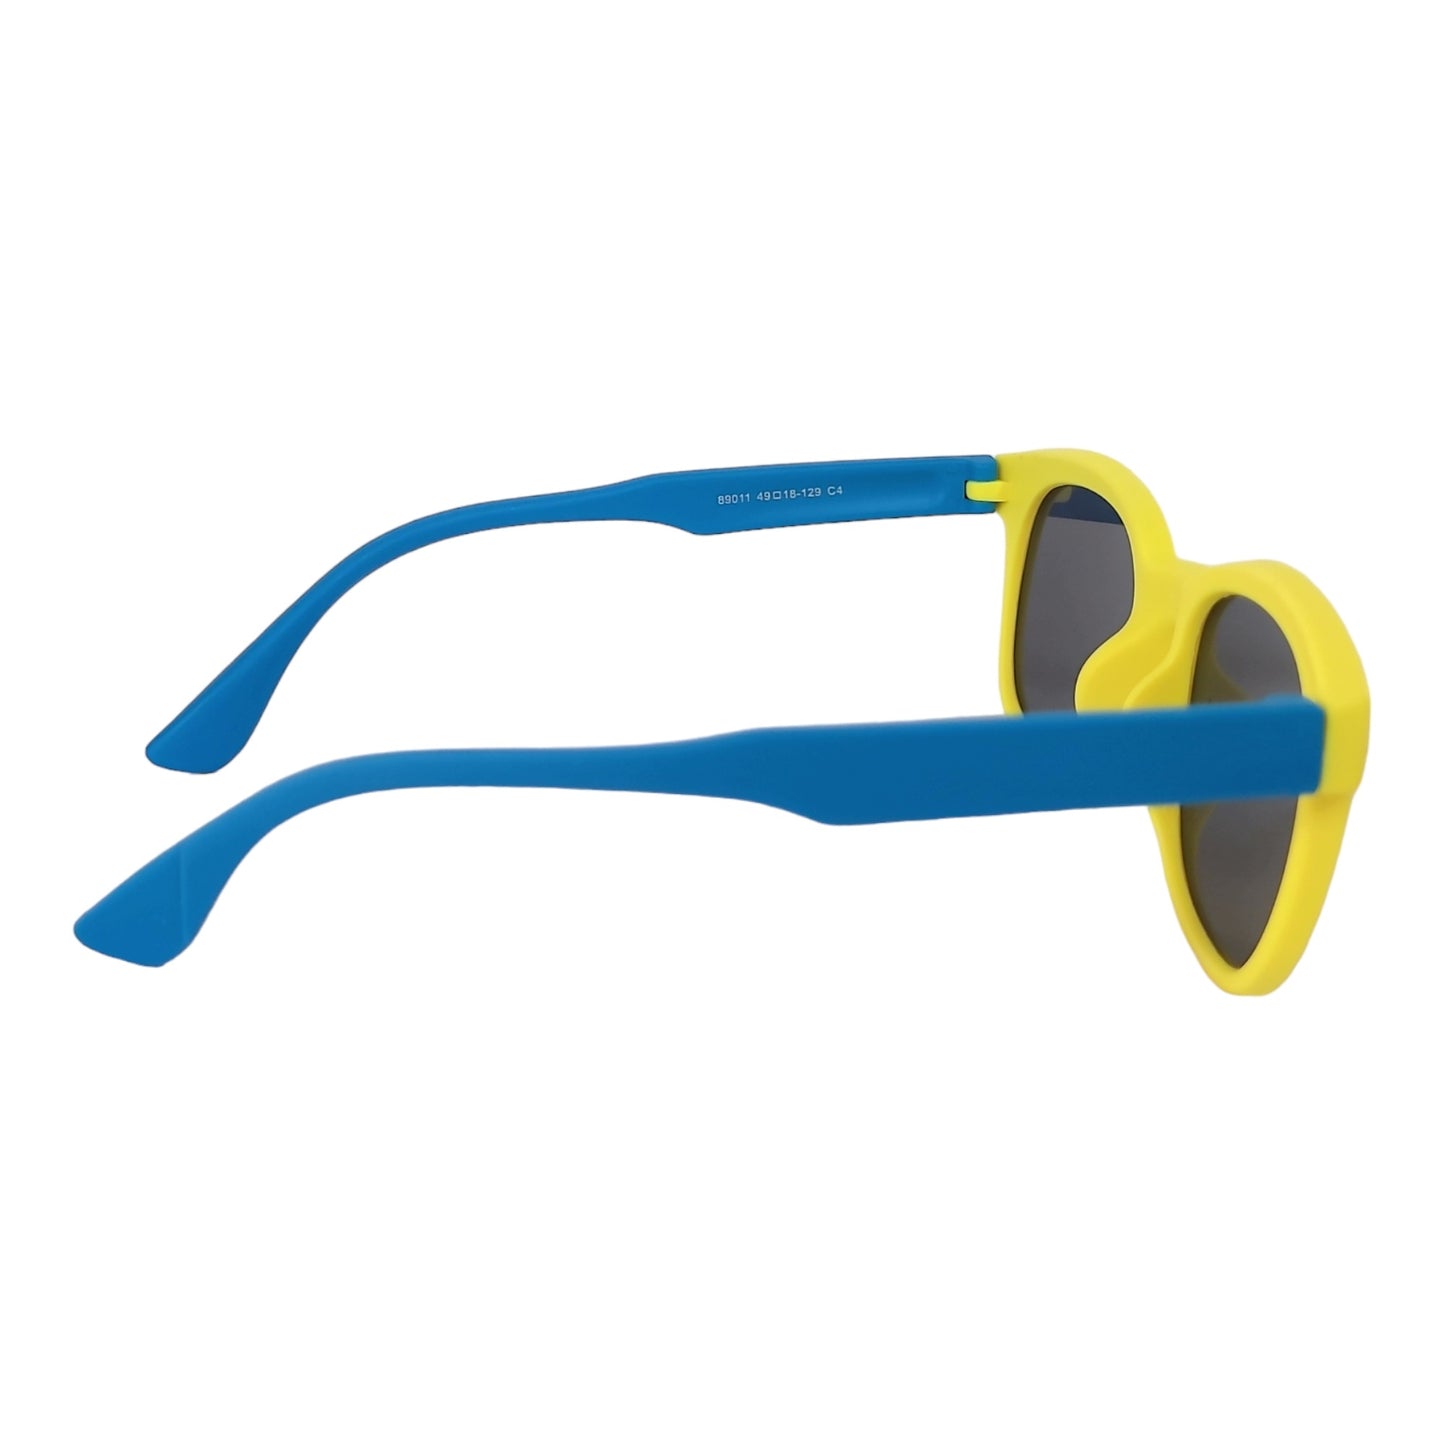 Stylish Kids Polarized Sunglasses for Shades Age 4-9 Years Old, Girl or Boy  | affaires-9011 - Yellow-Blue